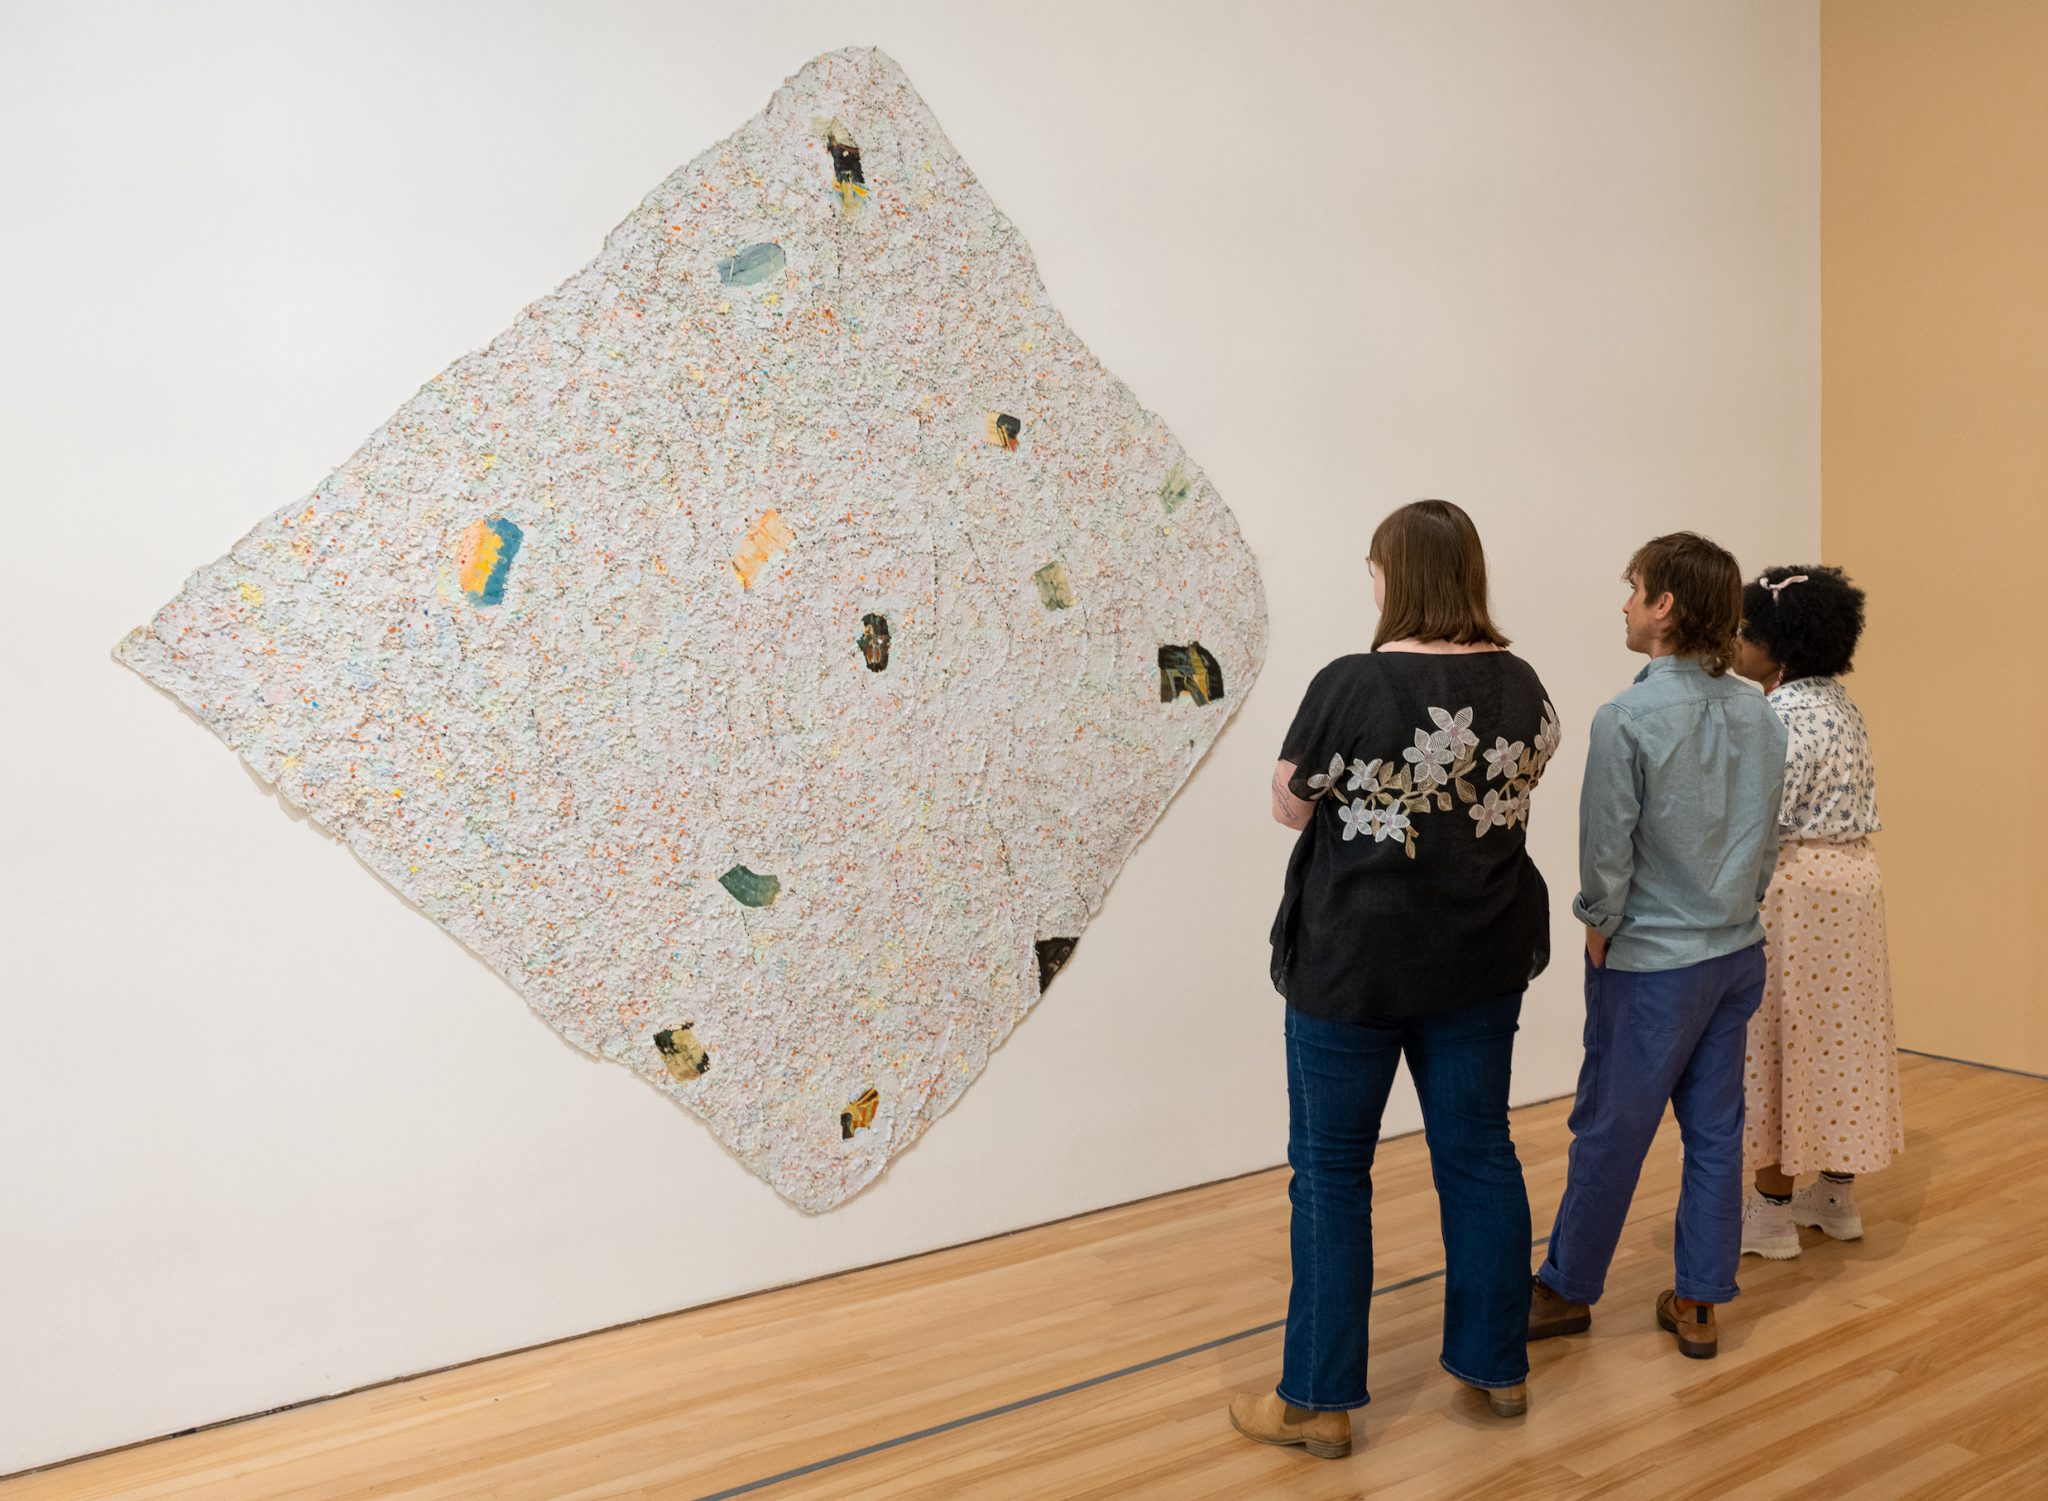 3 people standing in front of a large abstract artwork made of lots of punched paper holes over the canvas